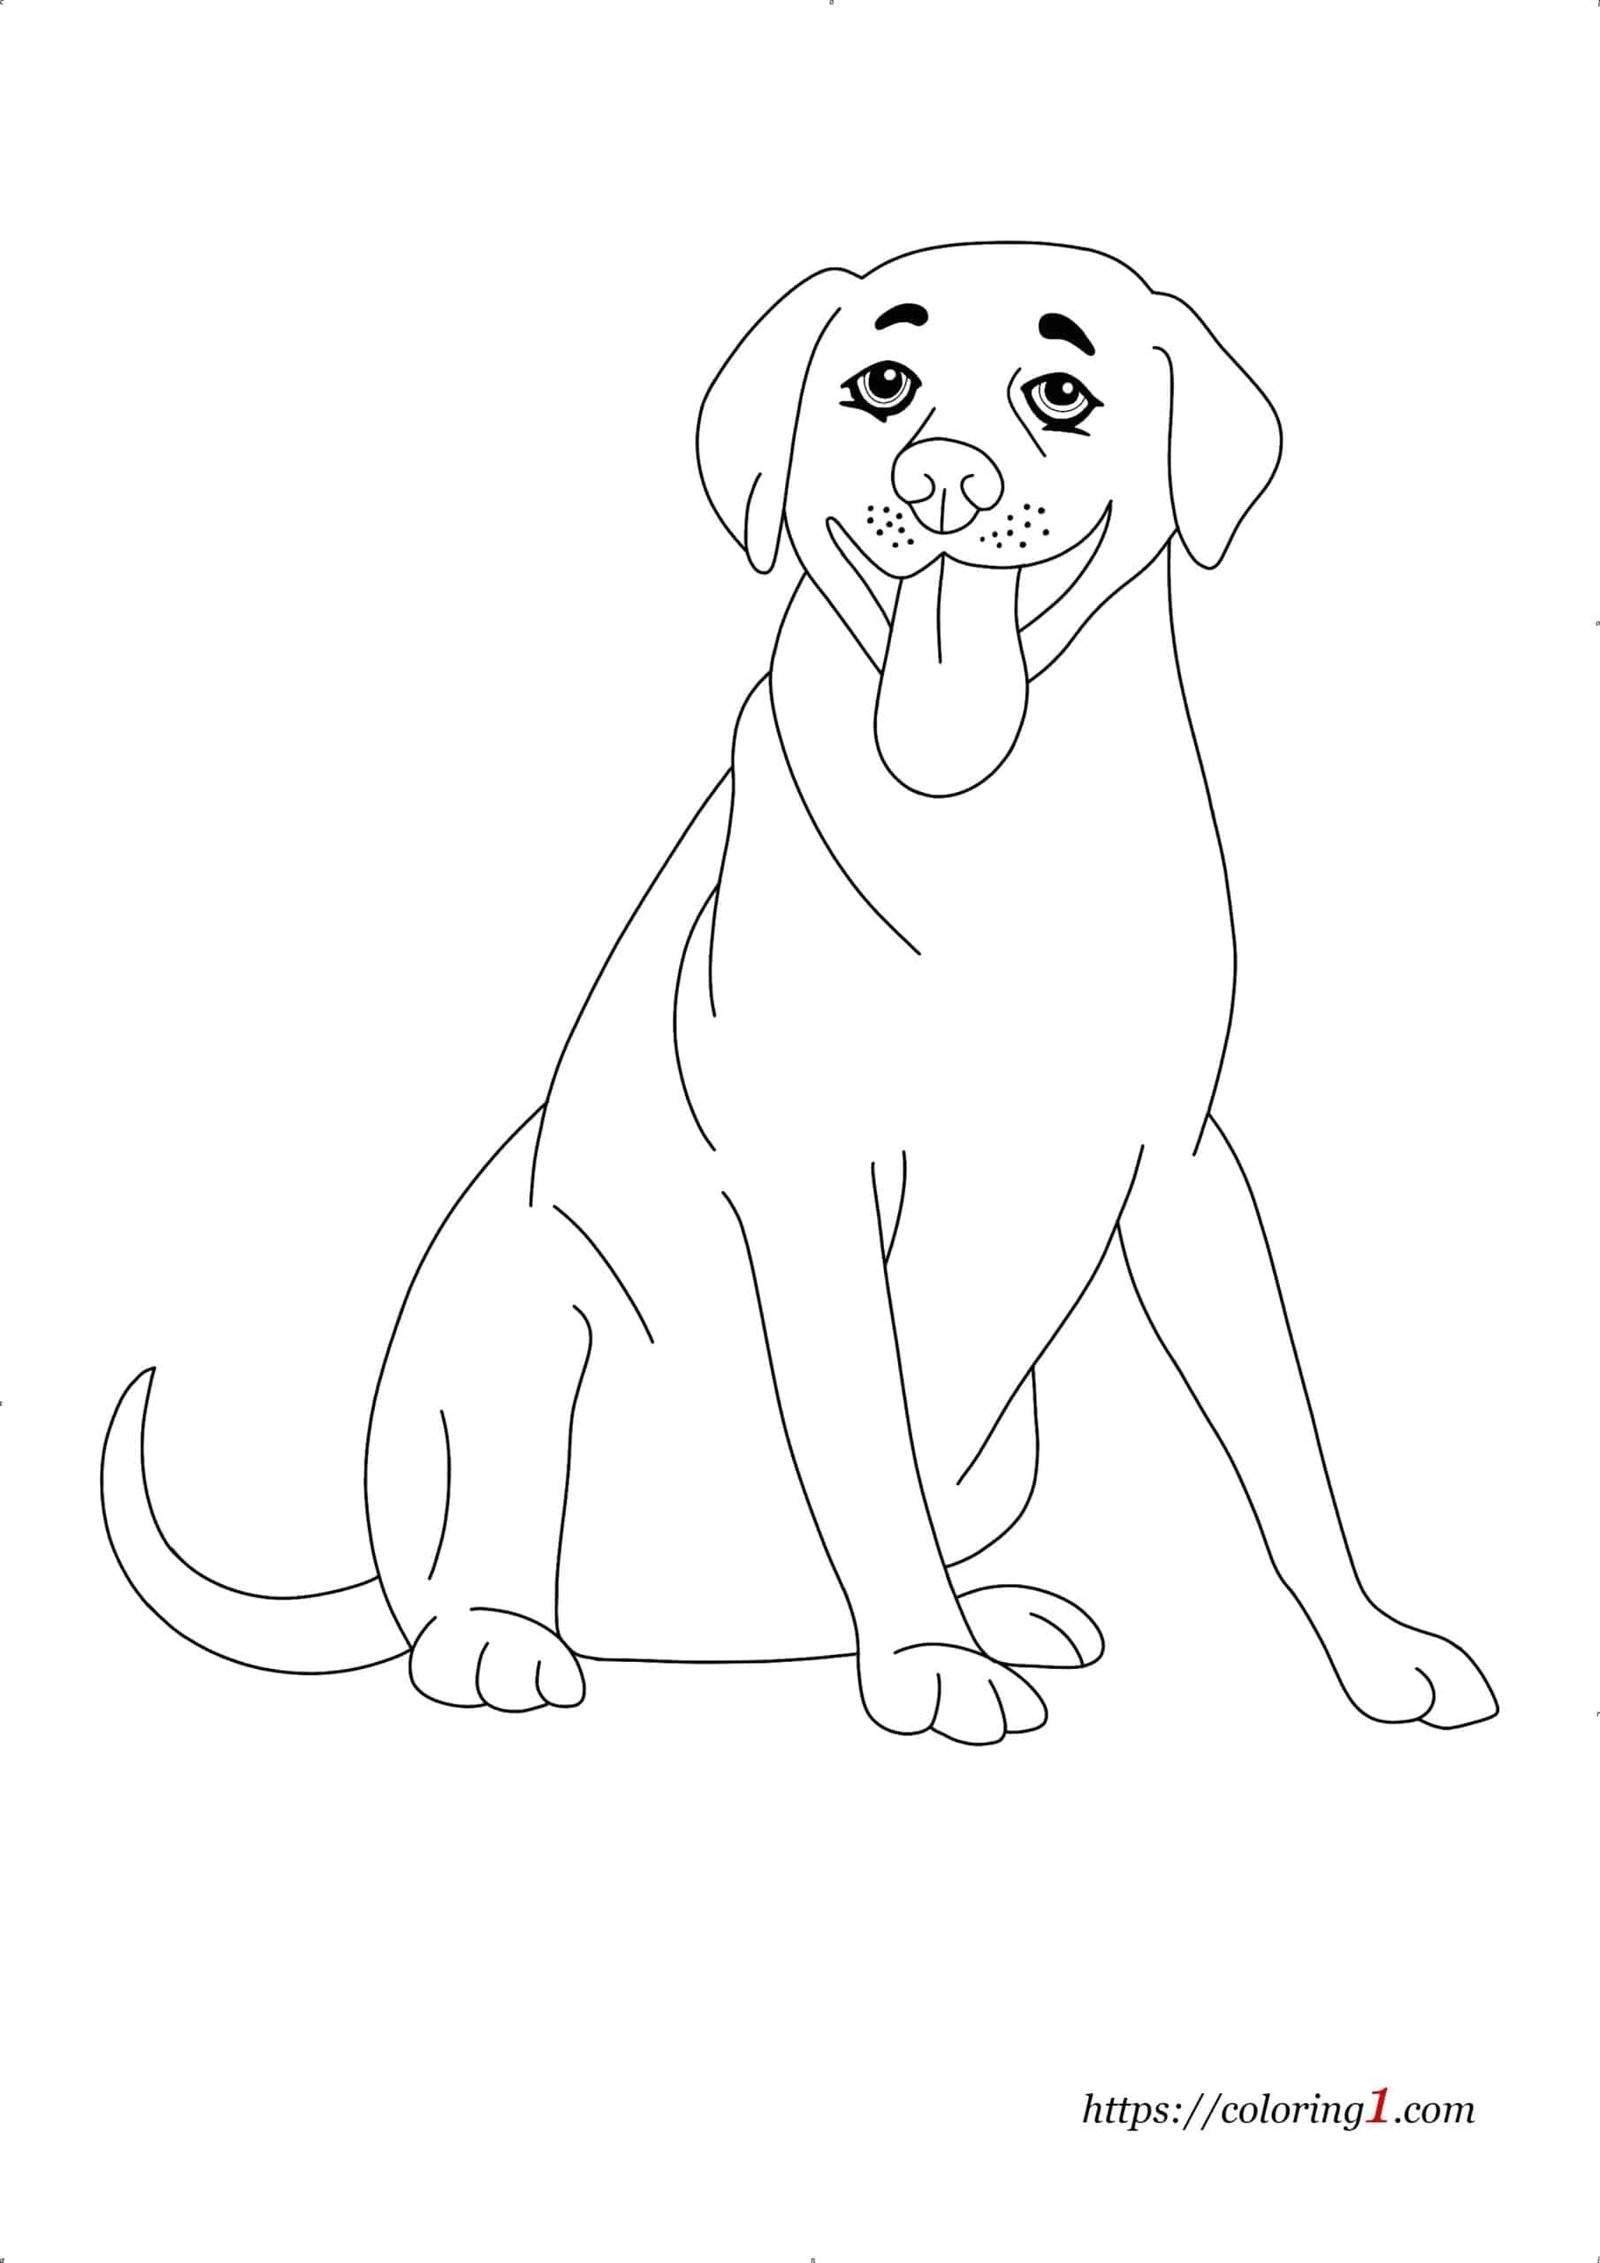 Lab Dog coloring page for adults and kids